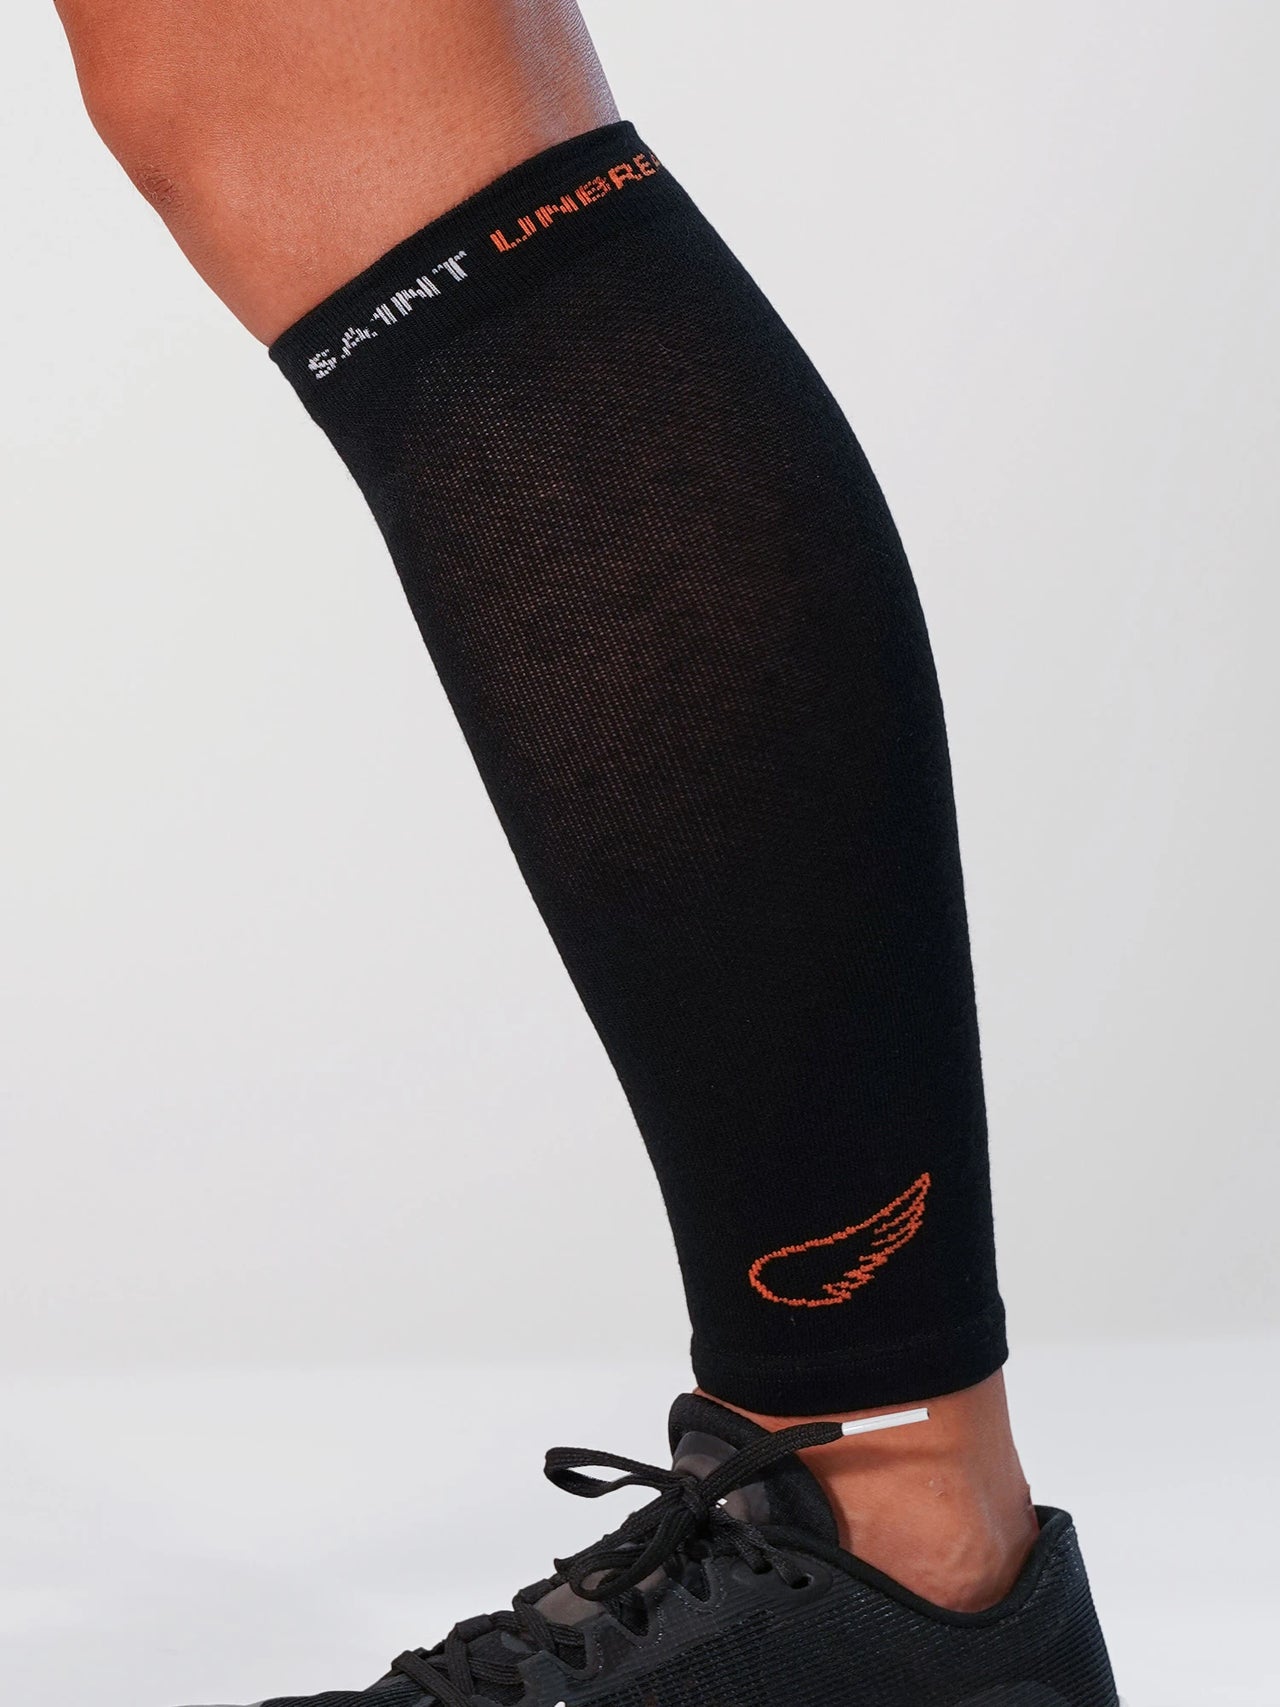 Unisex Anti-Fatigue & Recovery Compression Calf Sleeves - Black